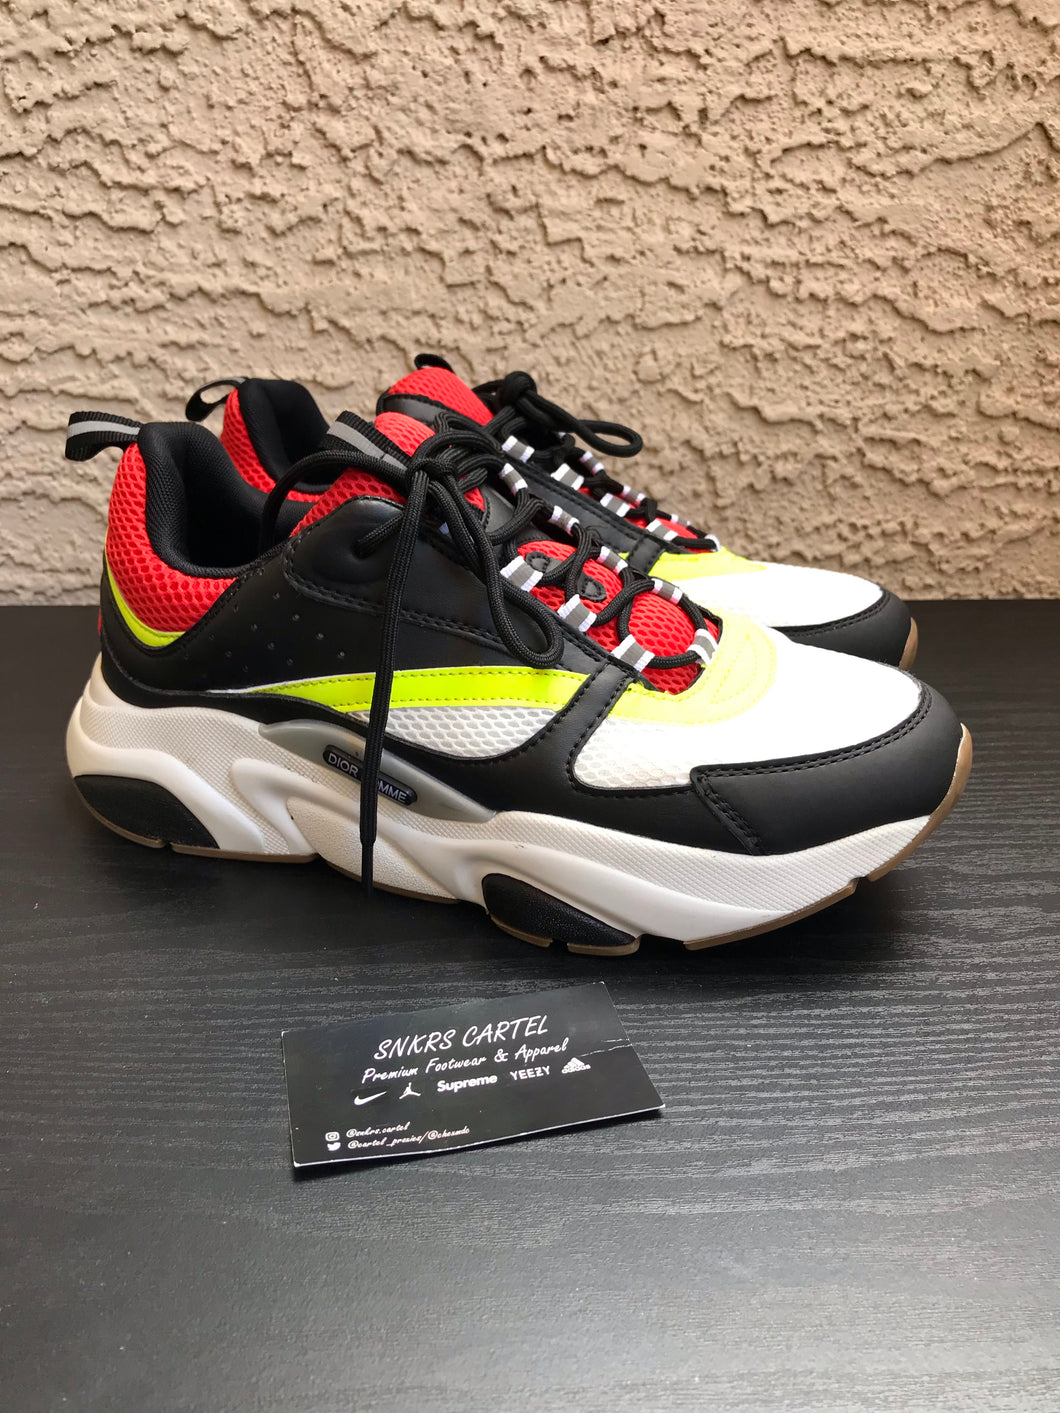 Dior Homme B22 Sneaker Black, Yellow & Red Dior Homme